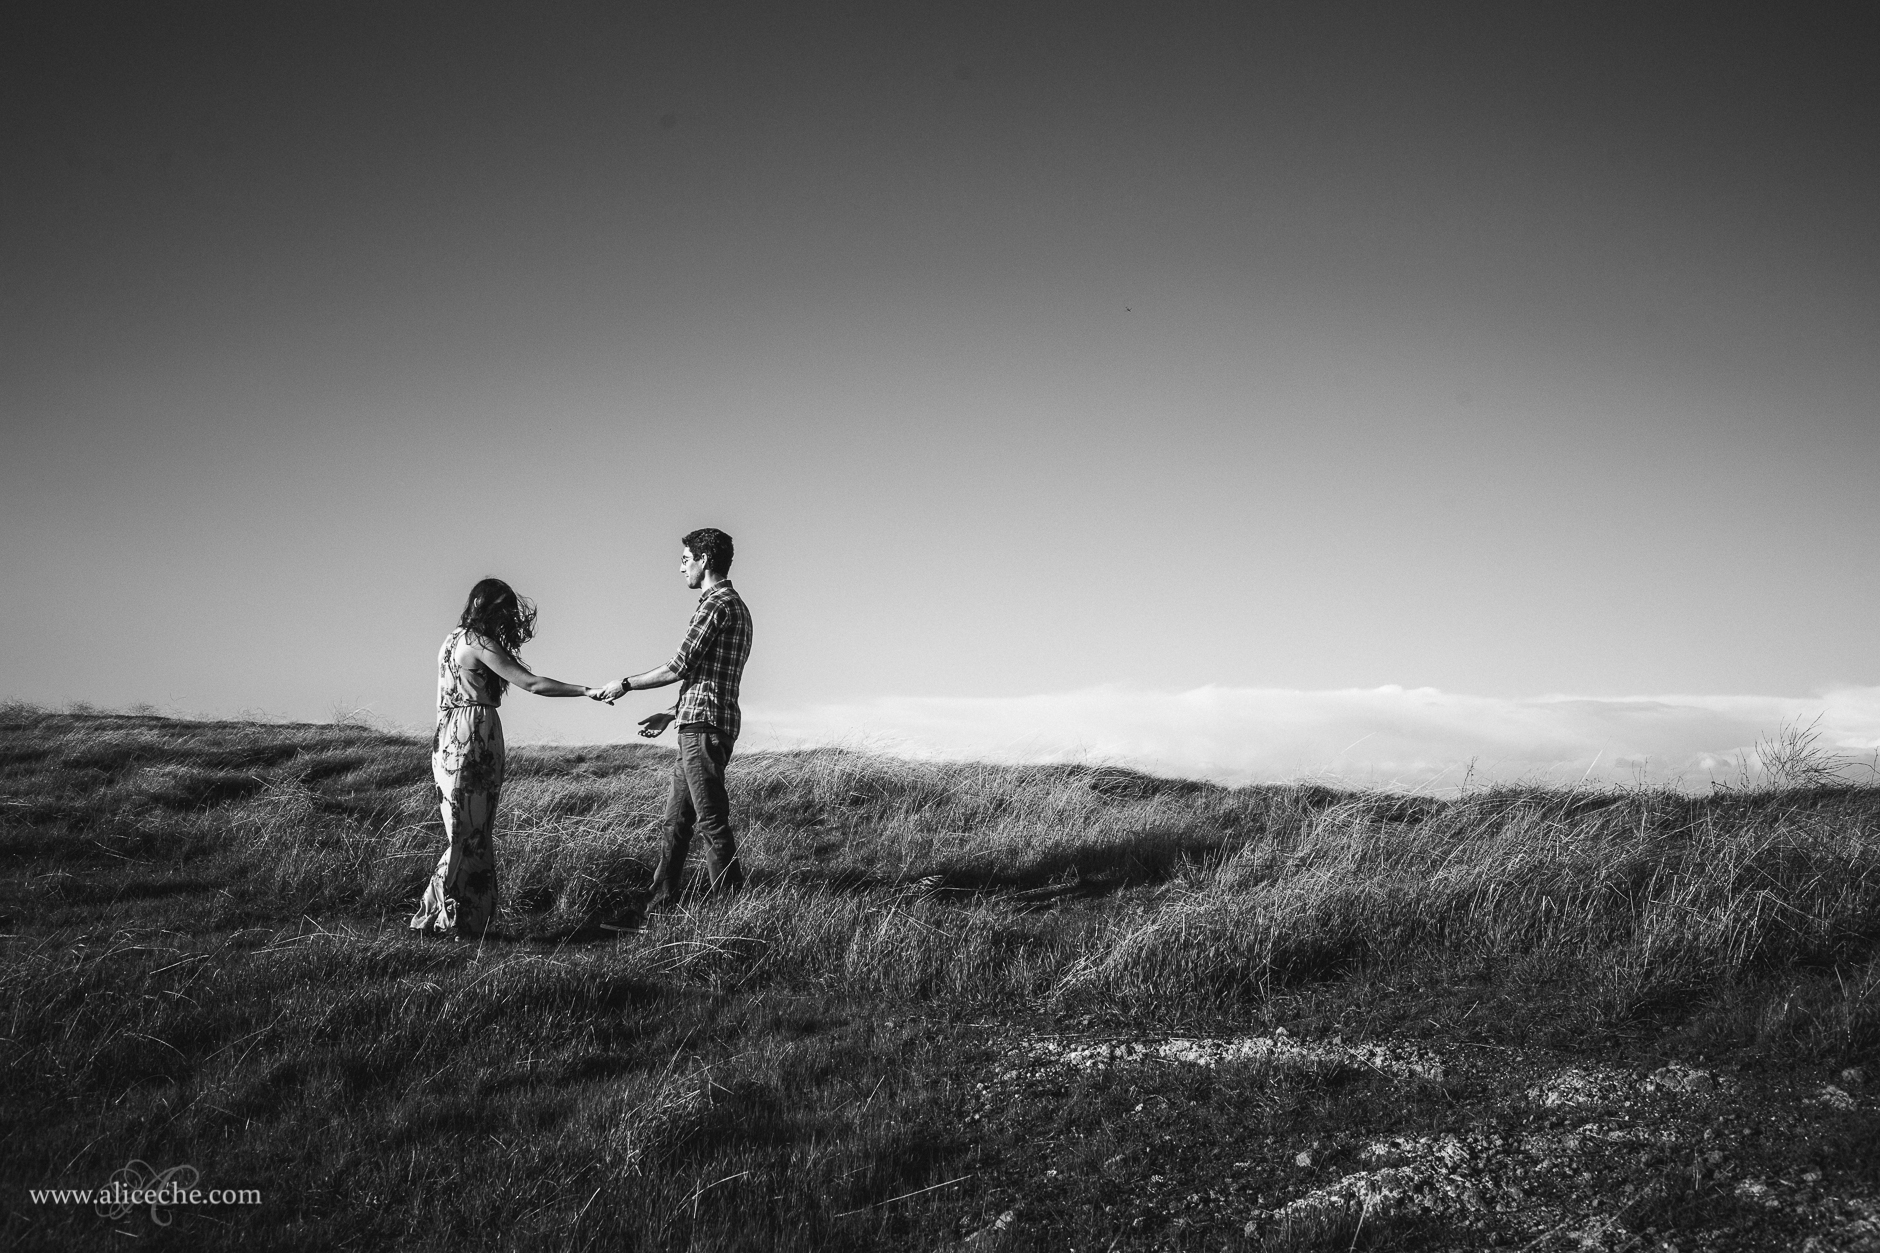 alice-che-photography-stanford-dish-windswept-black-and-white-couple